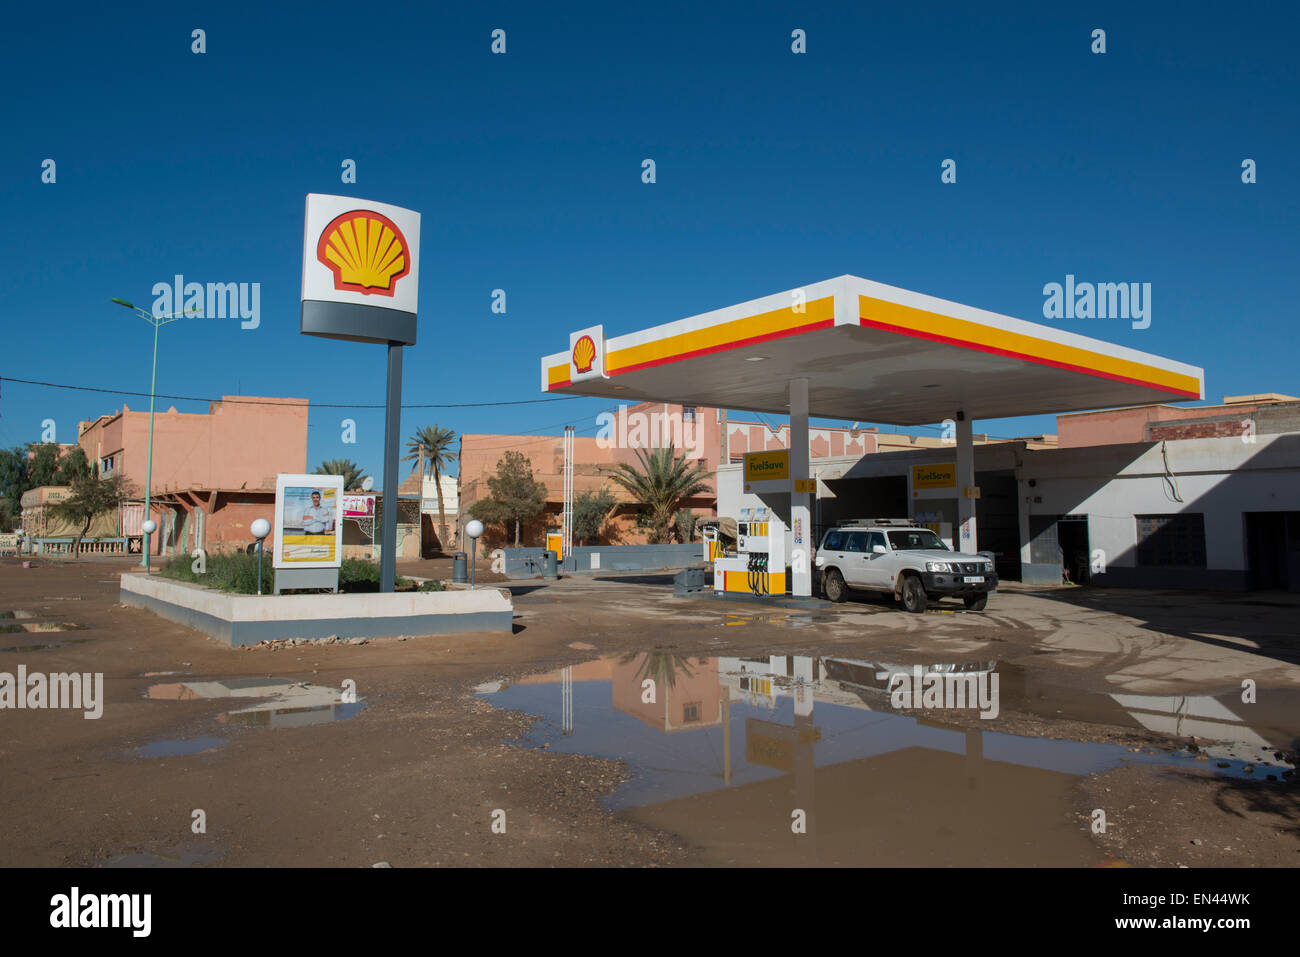 Shell gas station.  Tinejdad, Morocco. Stock Photo